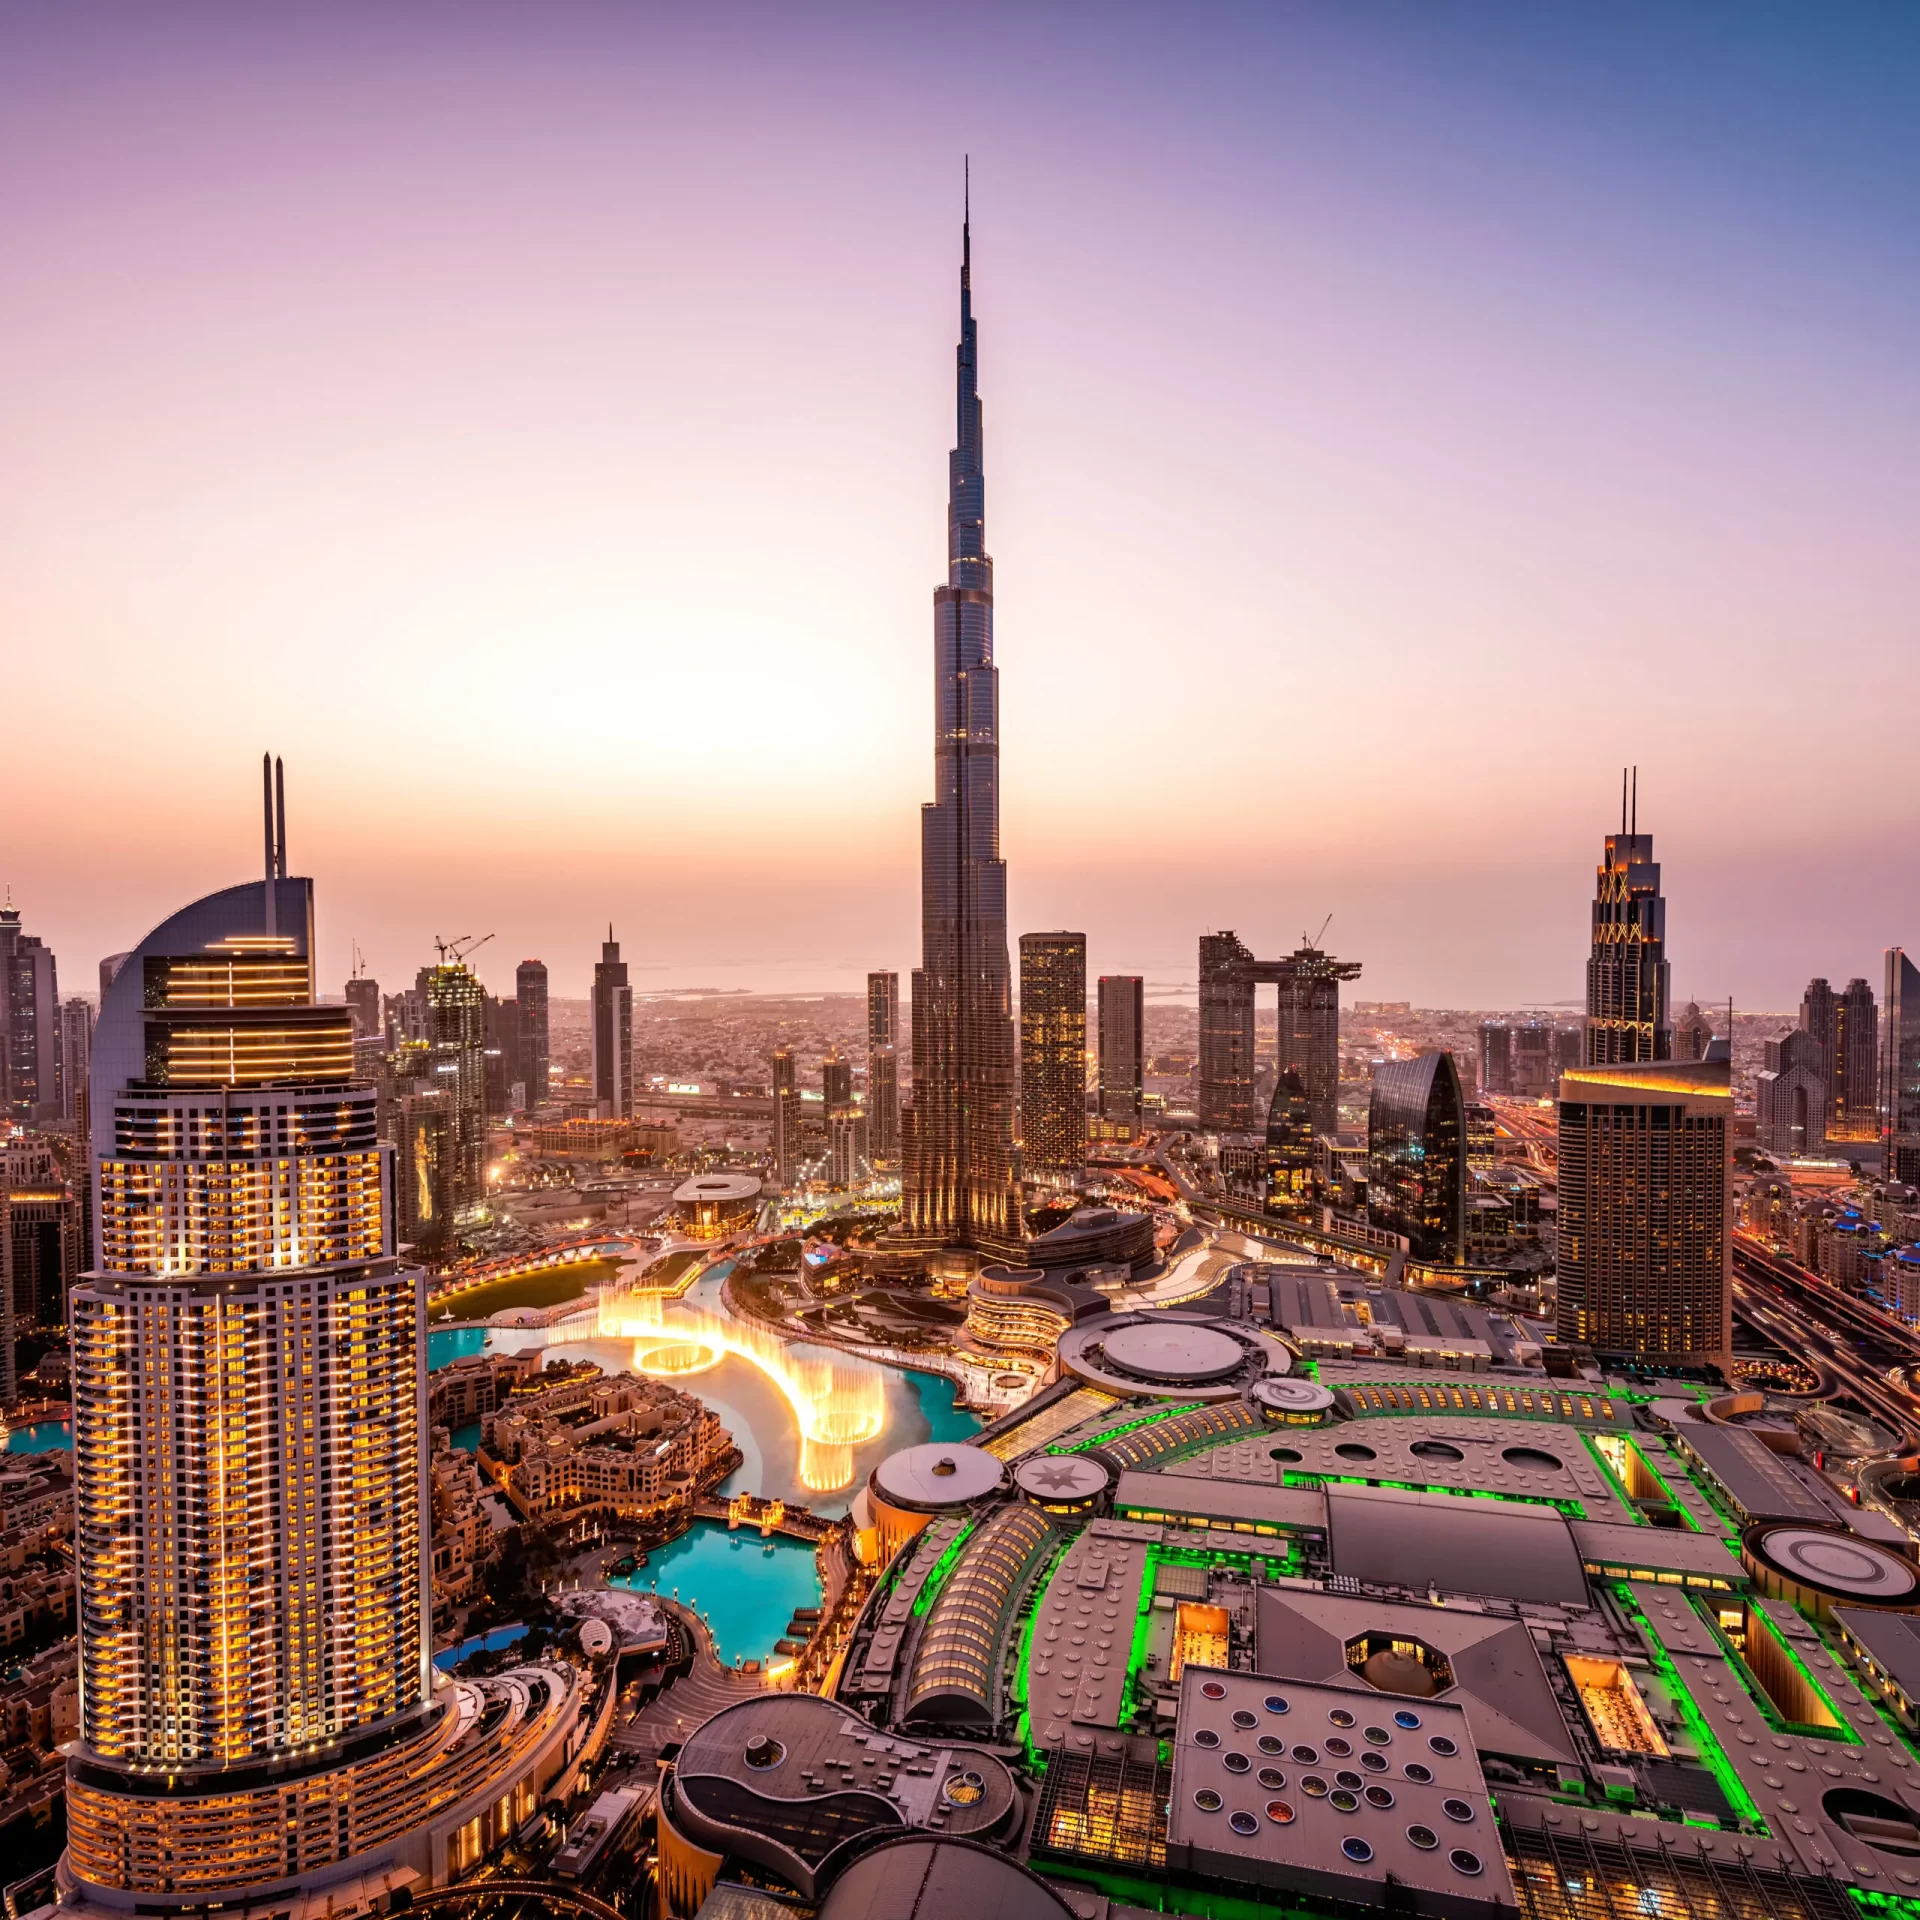 UAE on Your Mind? 17 Bucket List Destinations That Can’t Be Missed